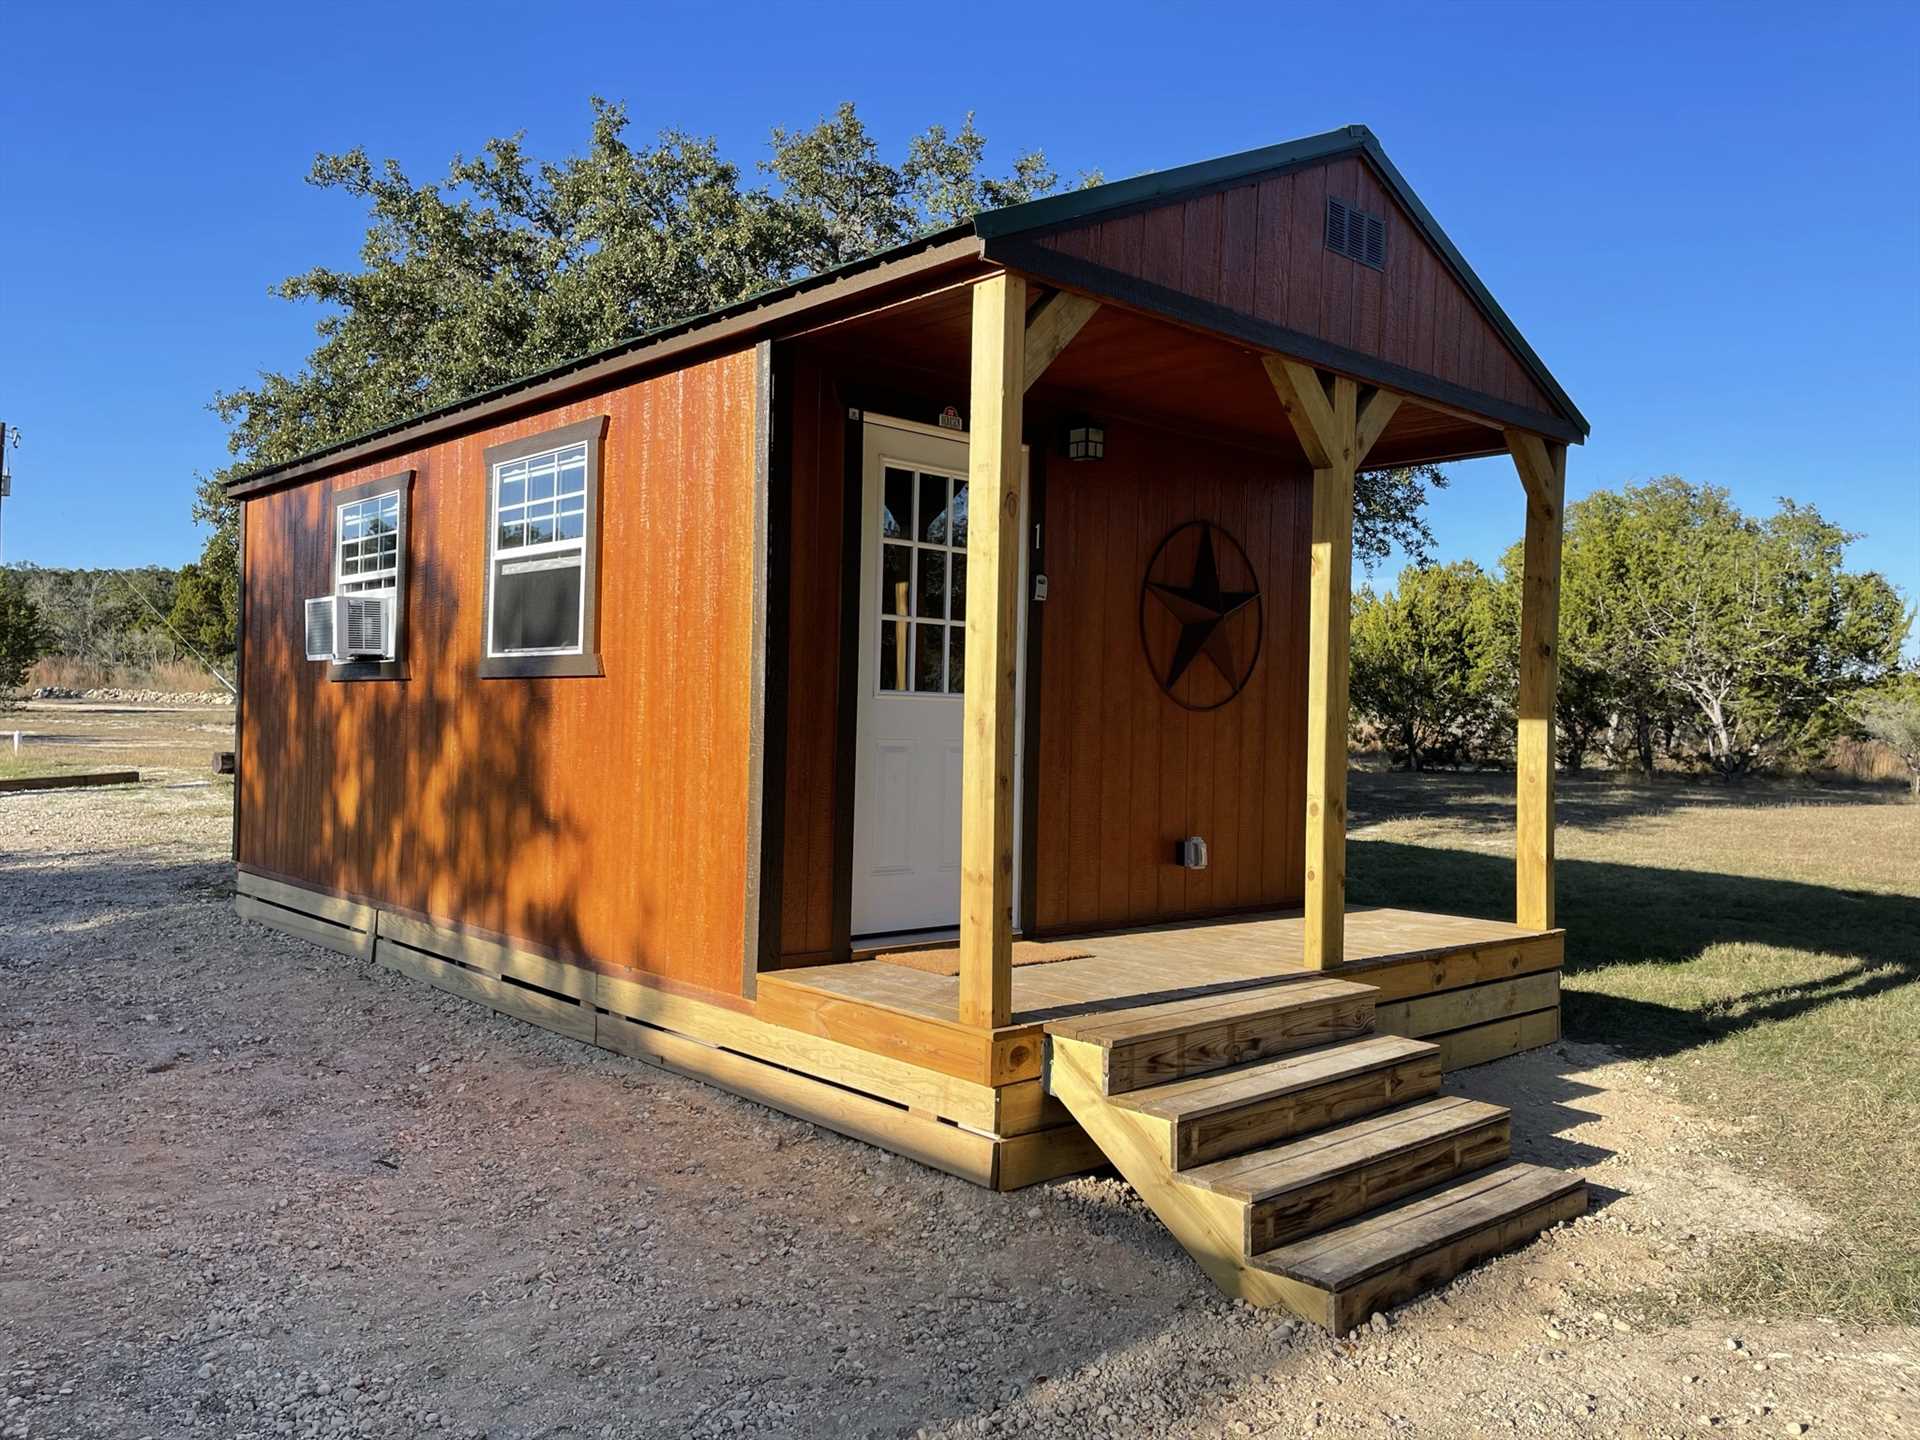                                                 The Great Heart Ranch Whitefield Cabin is the perfect size for a cozy and wonderful Hill Country escape for two!